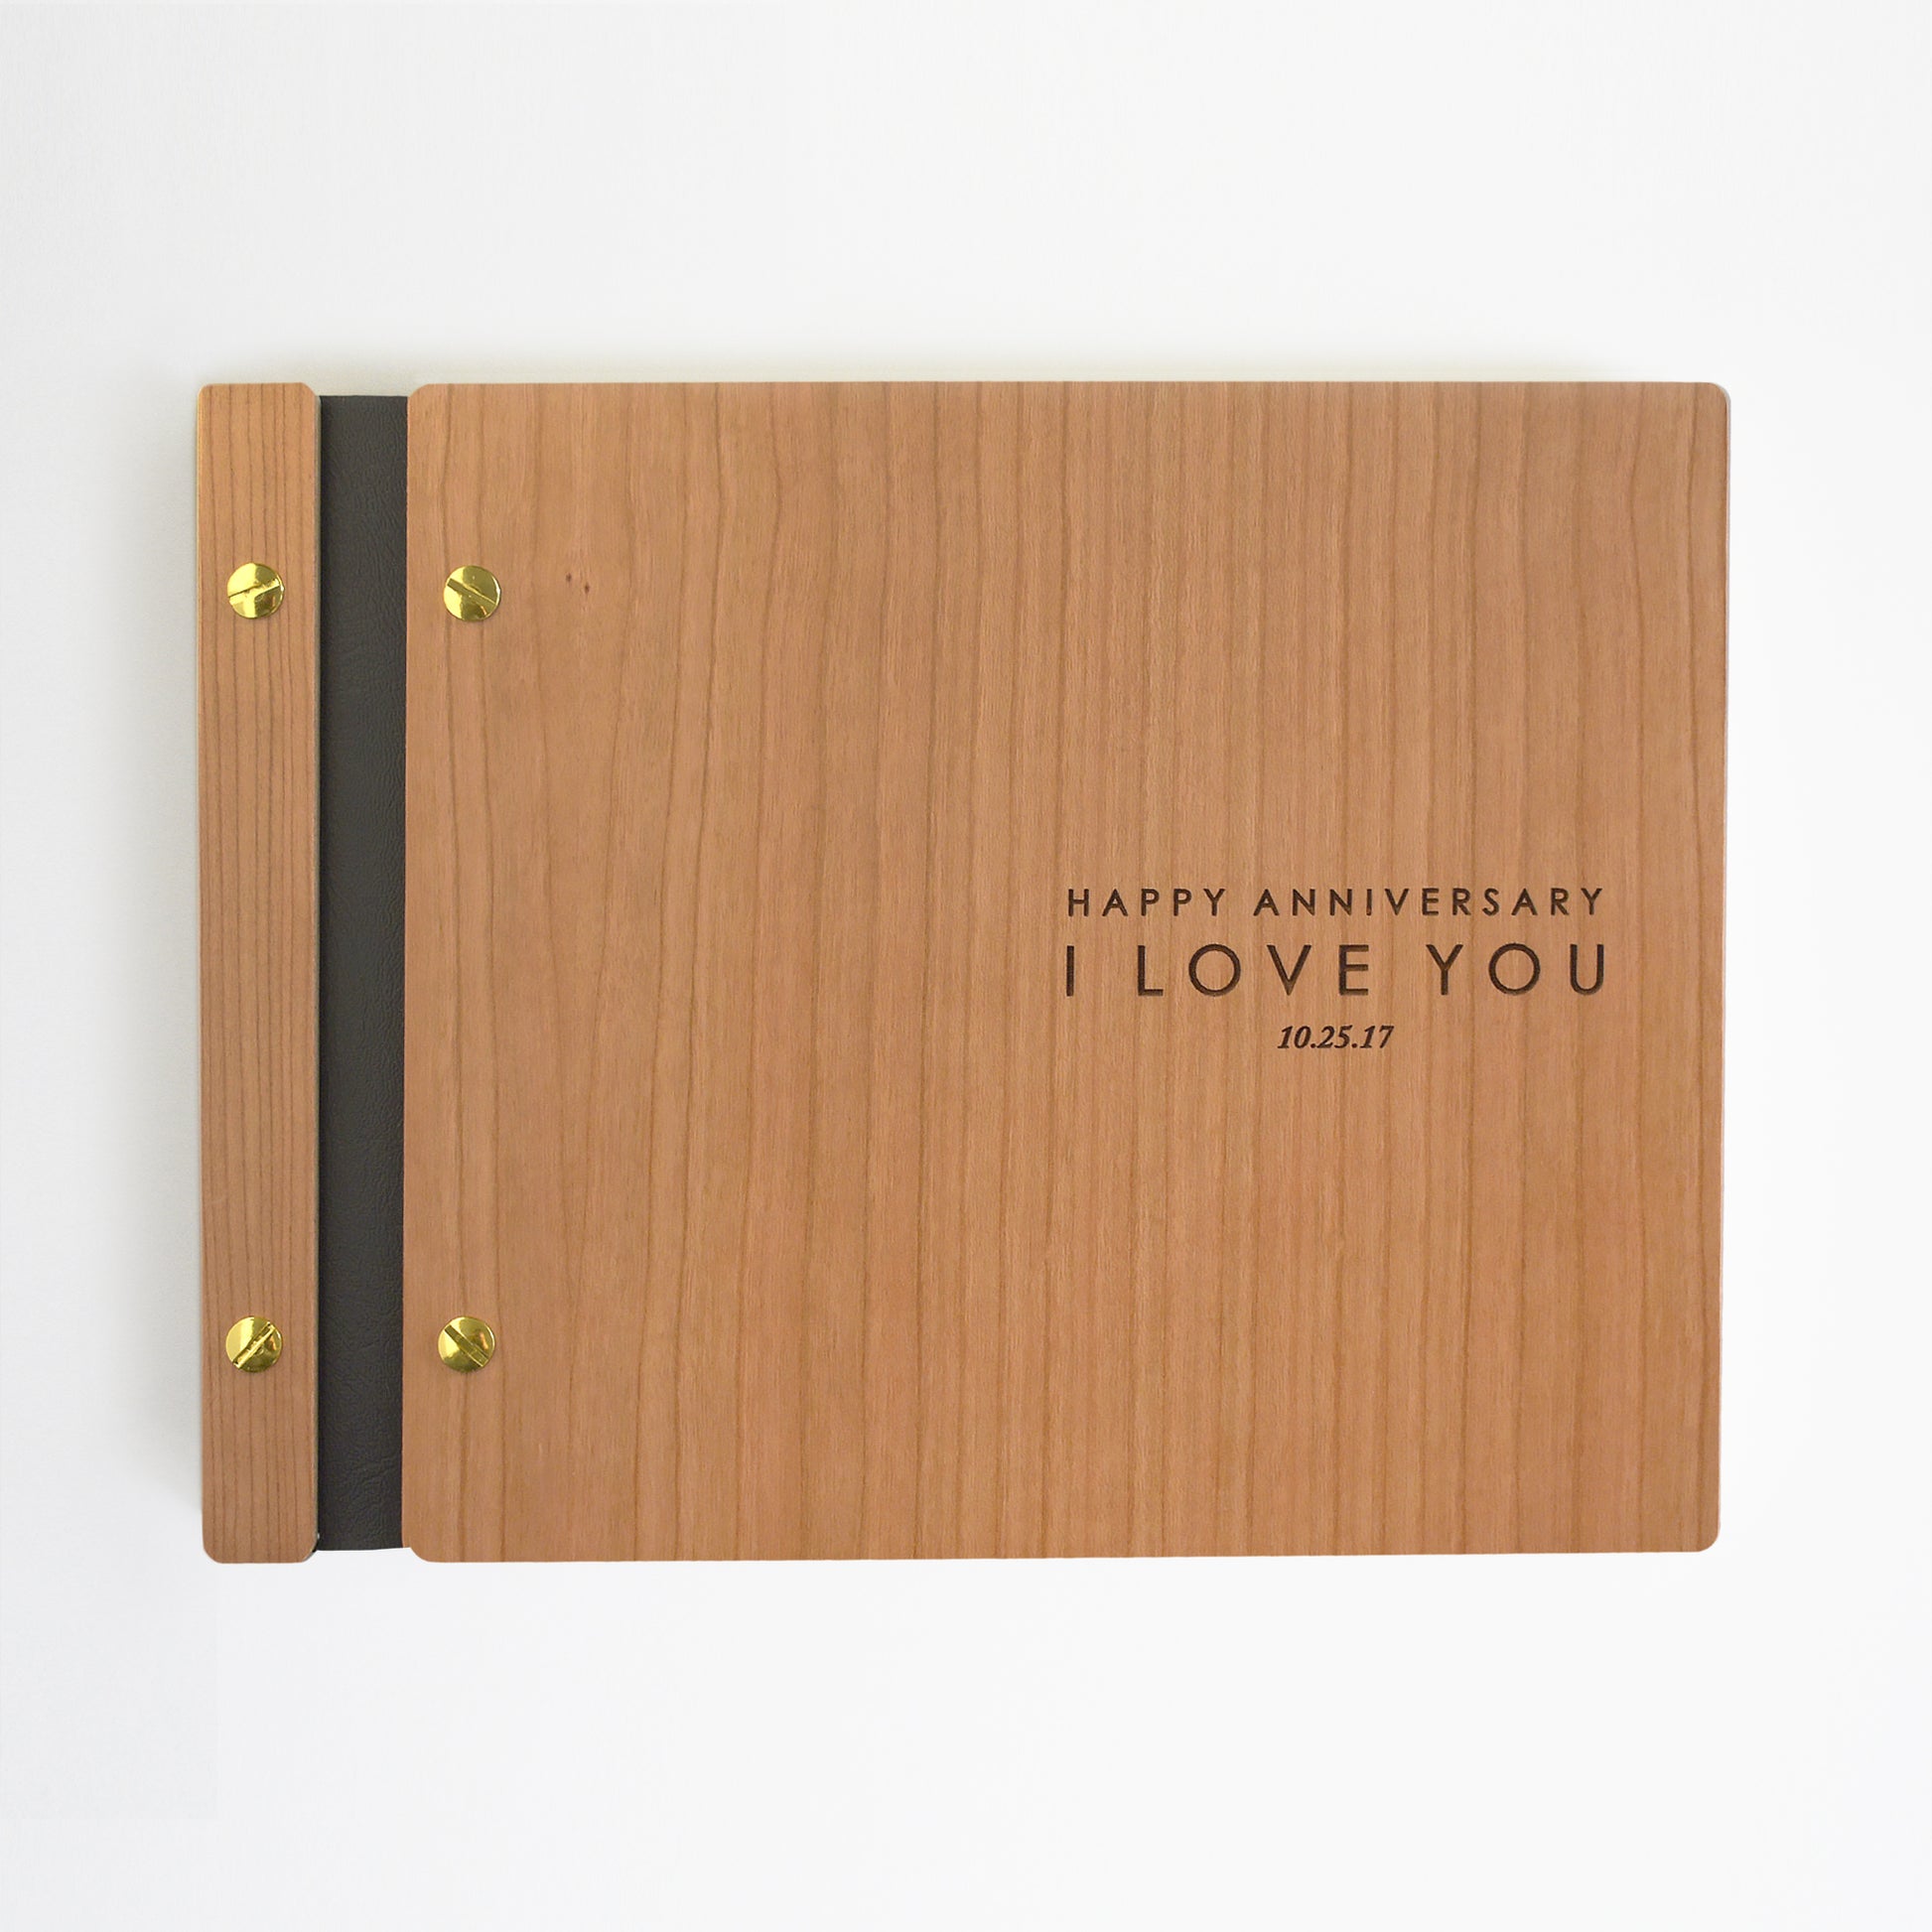 An 8.5x11" guest book lies on a table. Made of cherry wood, black vegan leather binding, and gold hardware. The front cover reads “Happy Anniversary, I love you. 10.25.17.”